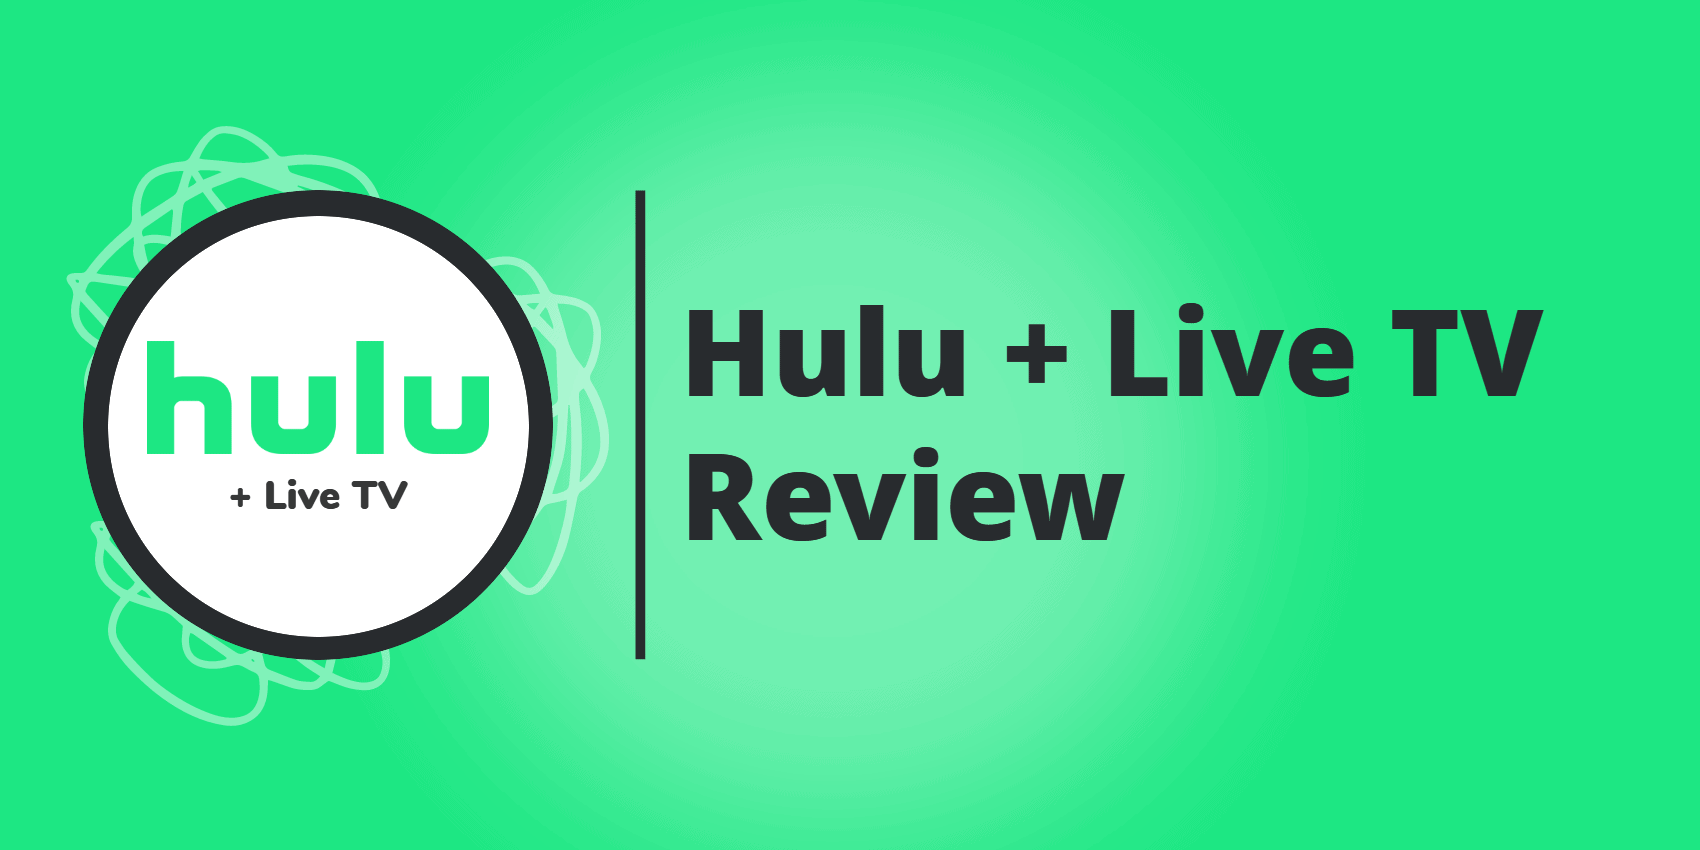 Hulu + Live TV Review: Is it Worth the Price? - HotDog